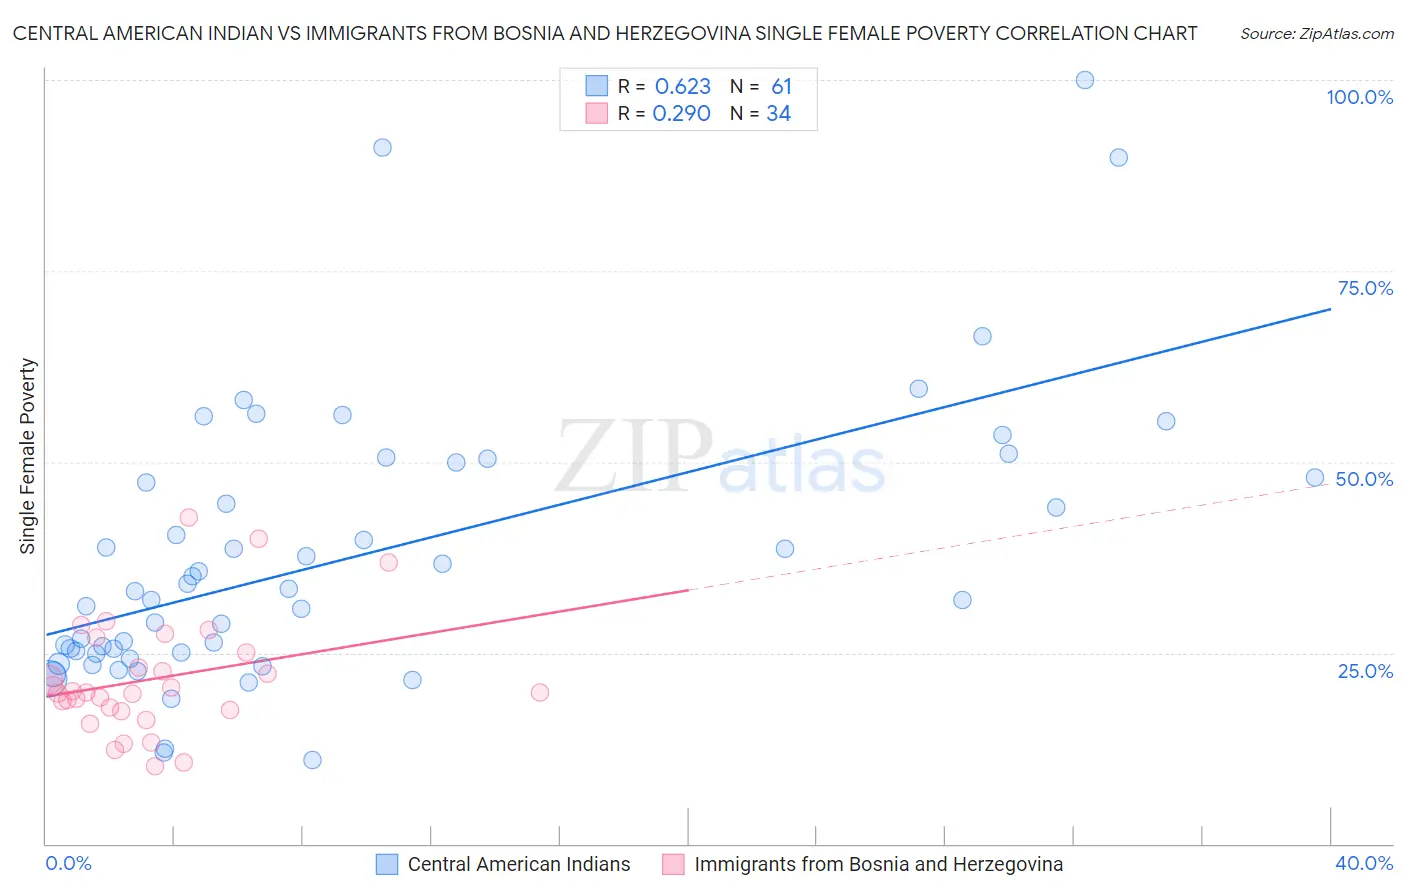 Central American Indian vs Immigrants from Bosnia and Herzegovina Single Female Poverty